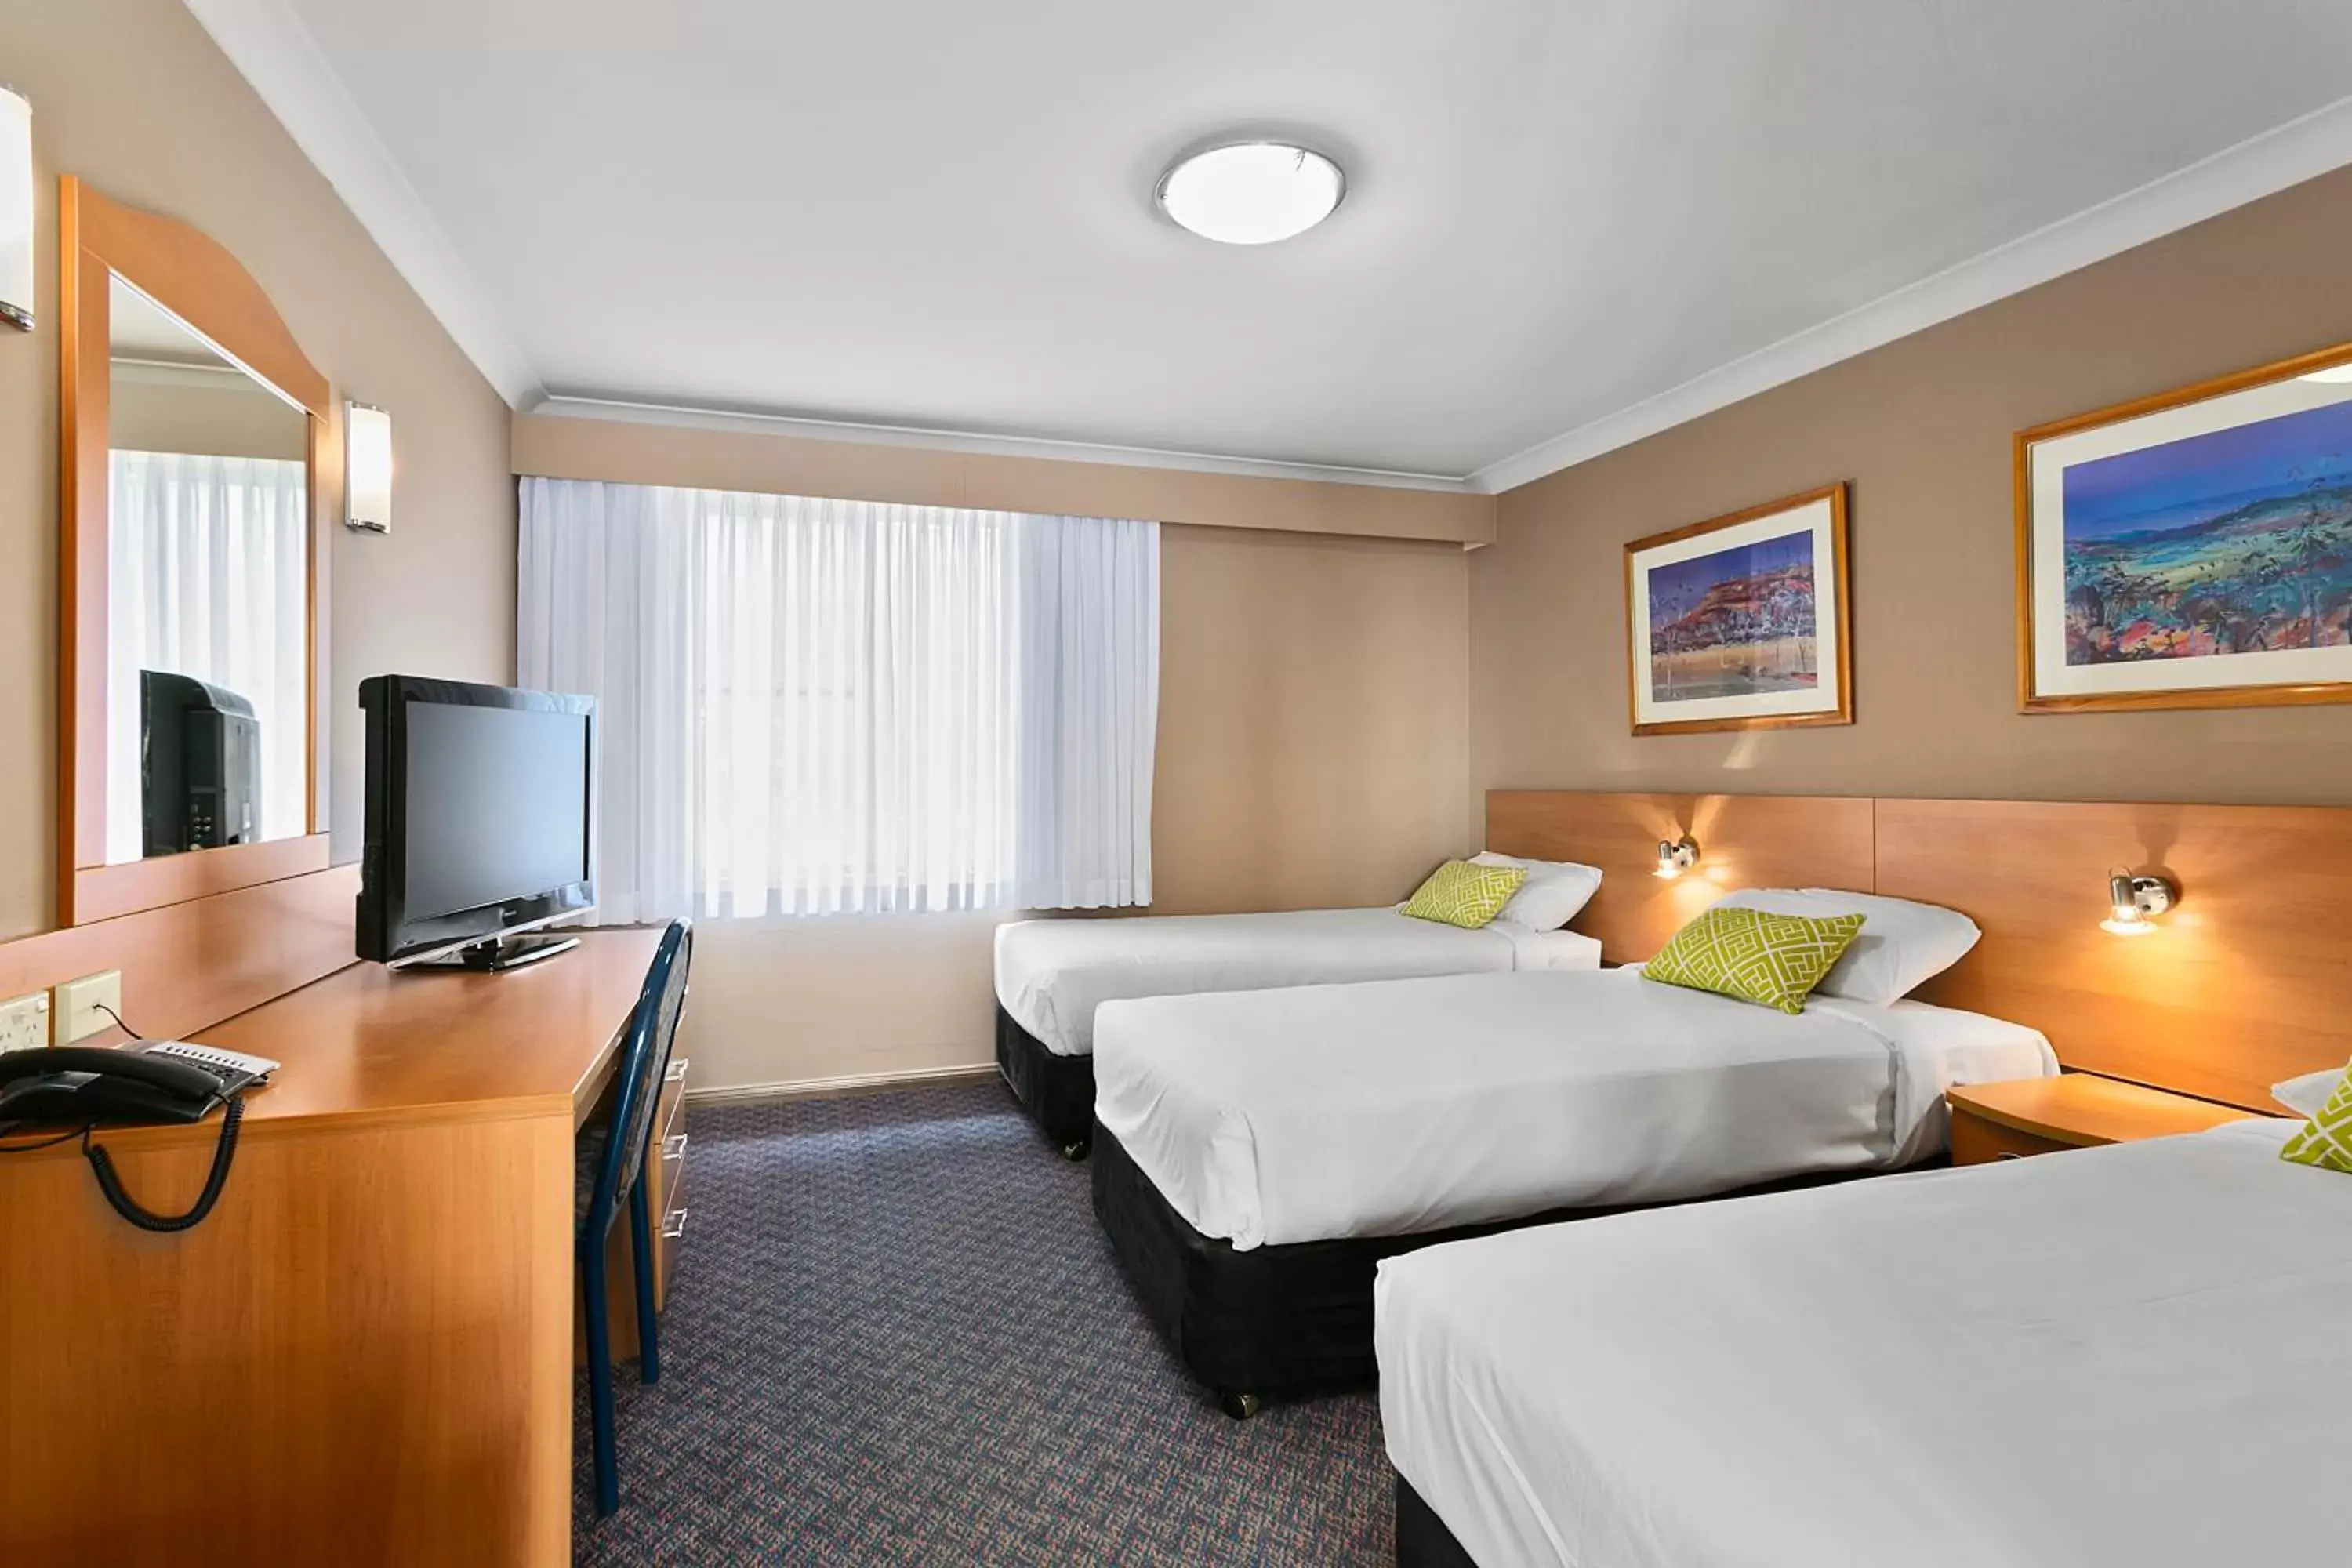 Property building, Bed in Quality Inn Penrith Sydney